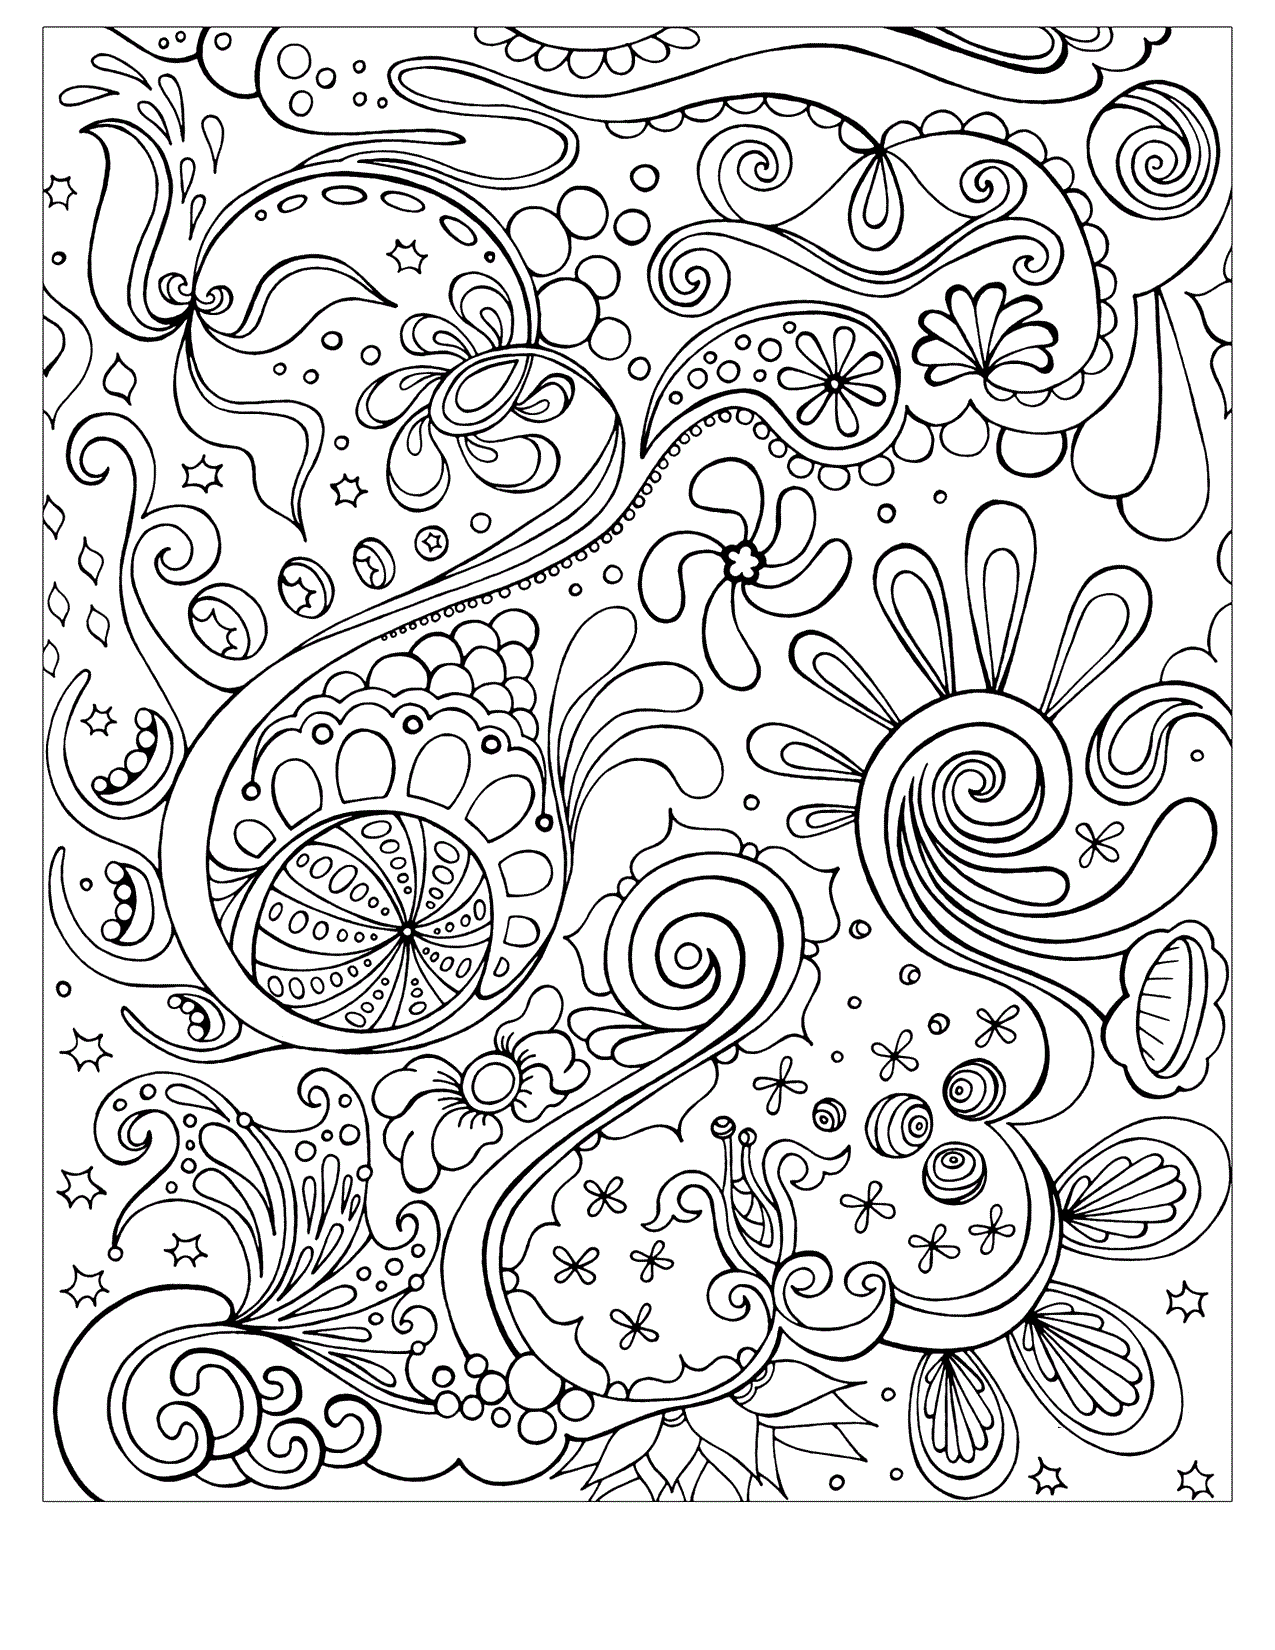 teenager-coloring-page-0006-q1